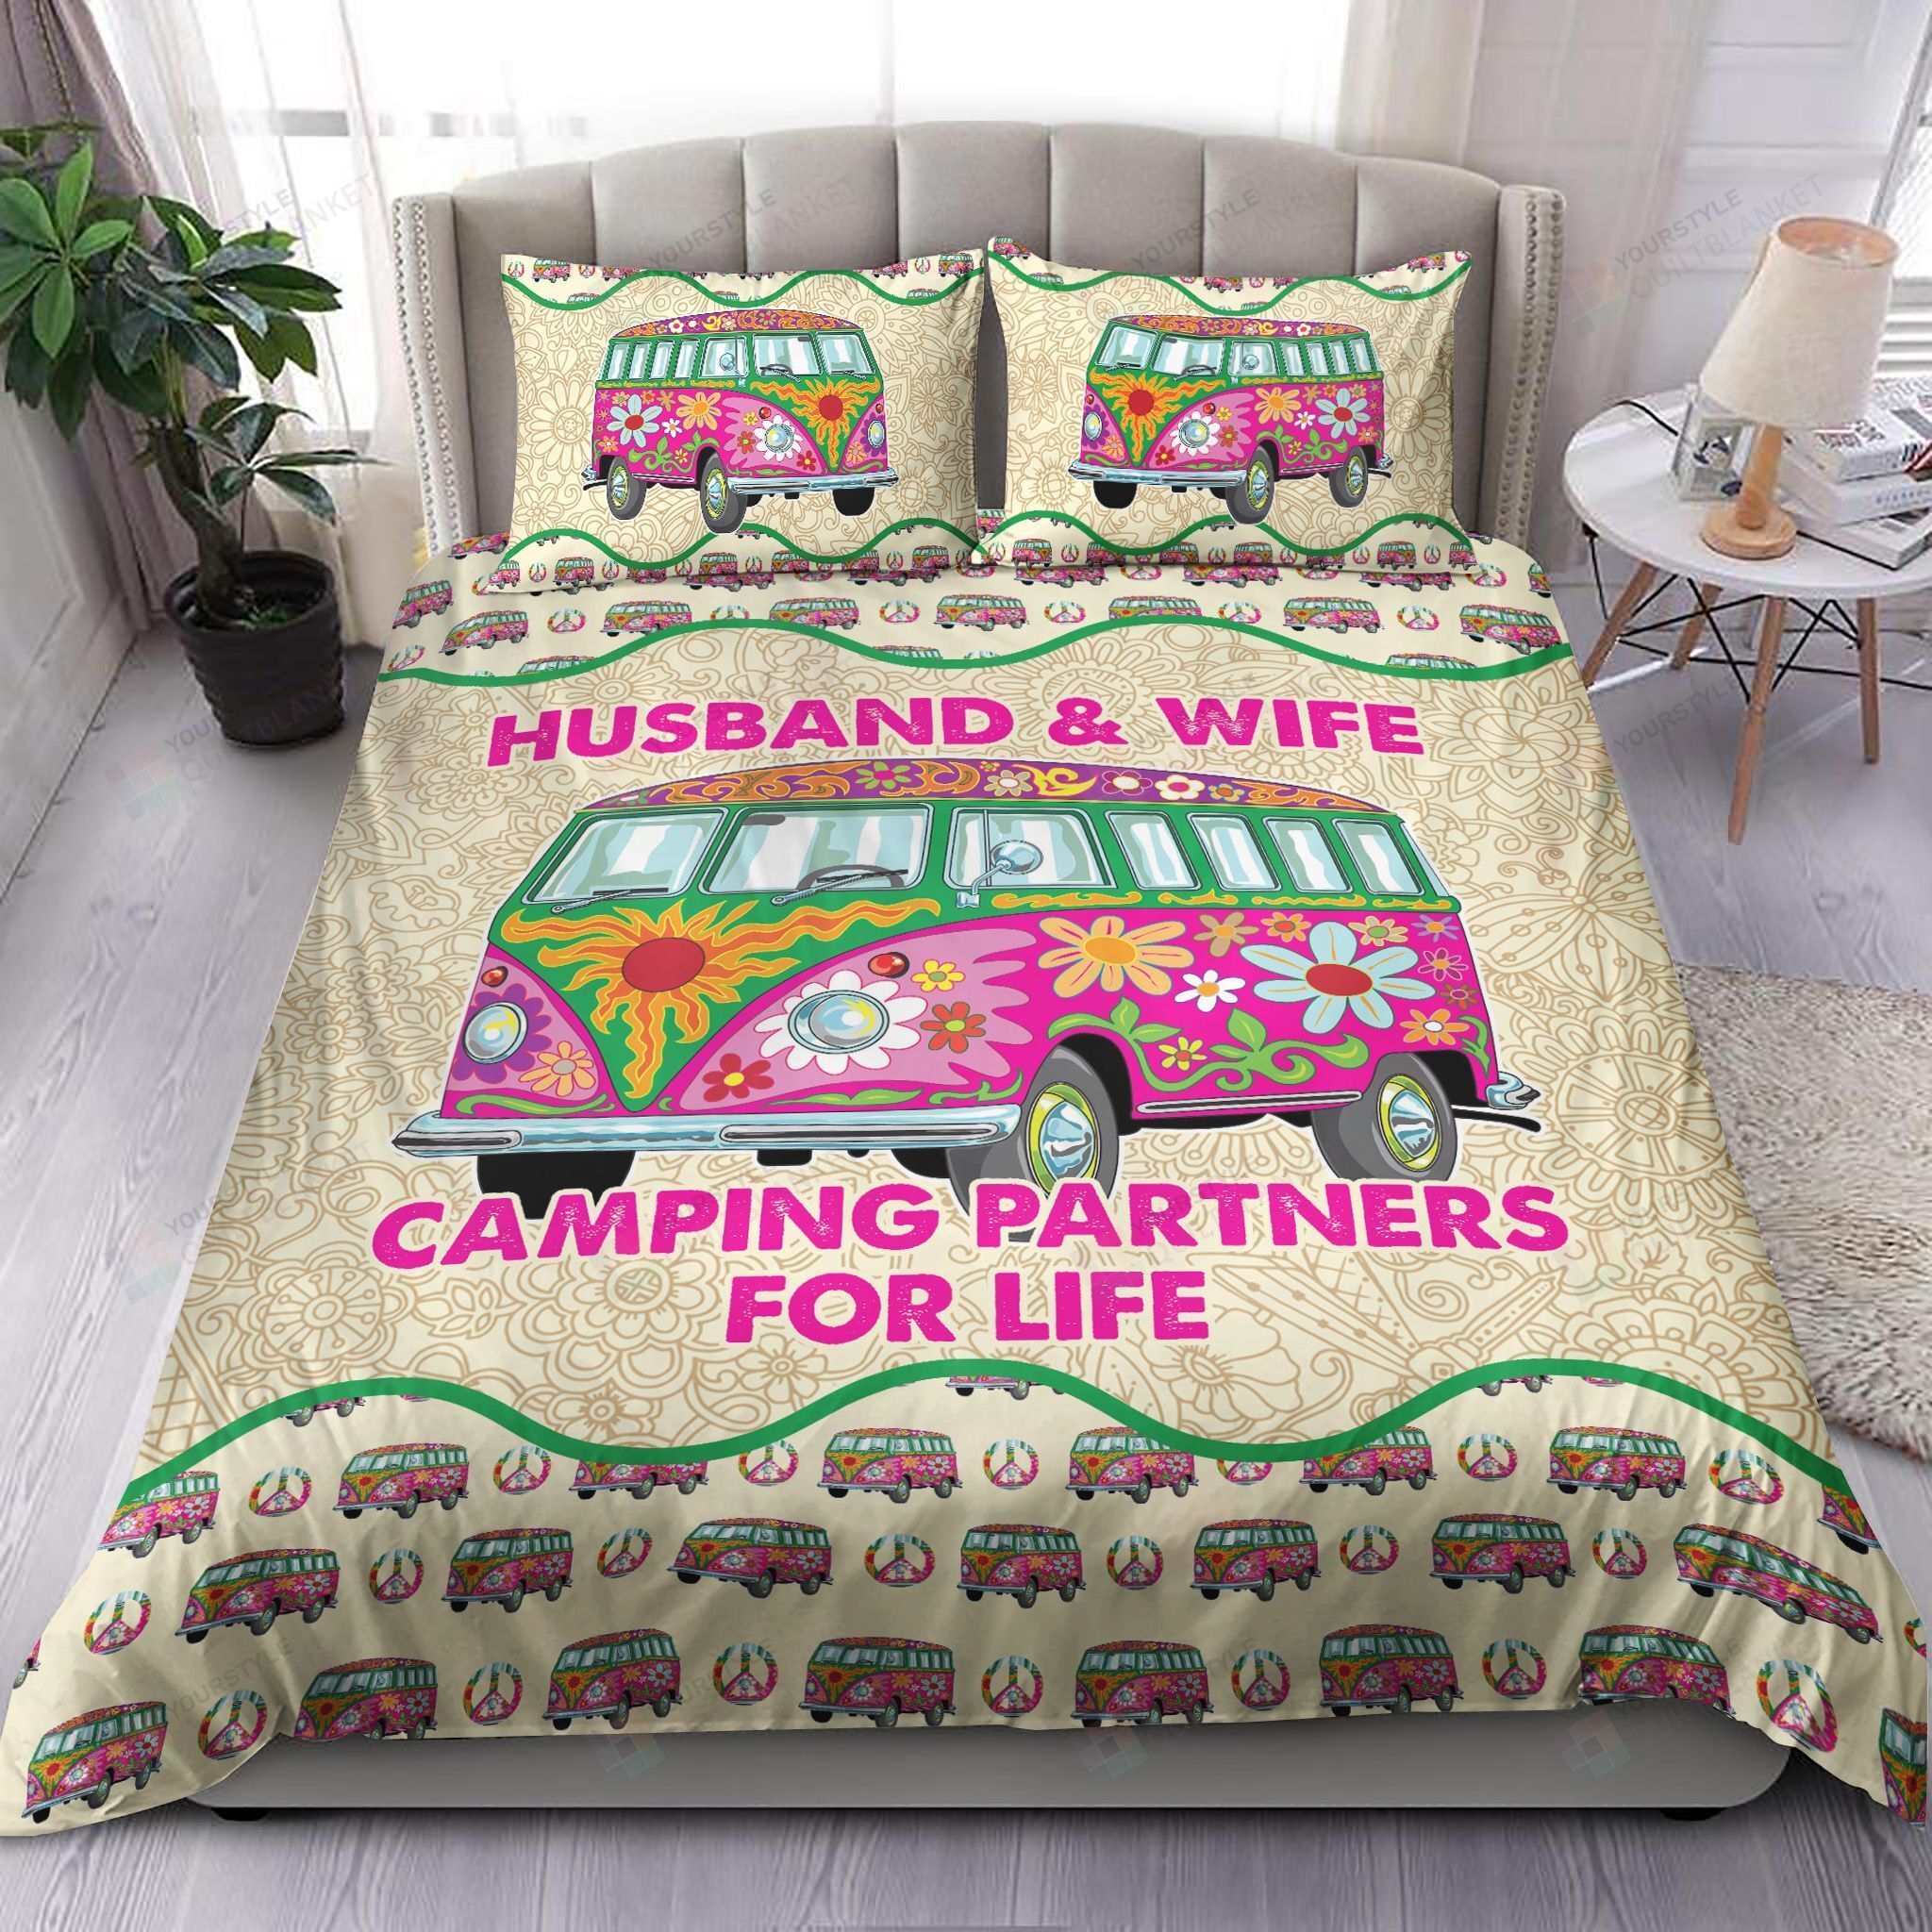 Husband And Wife Camping Partners For Life Bedding Set Bed Sheets Spread Comforter Duvet Cover Bedding Sets